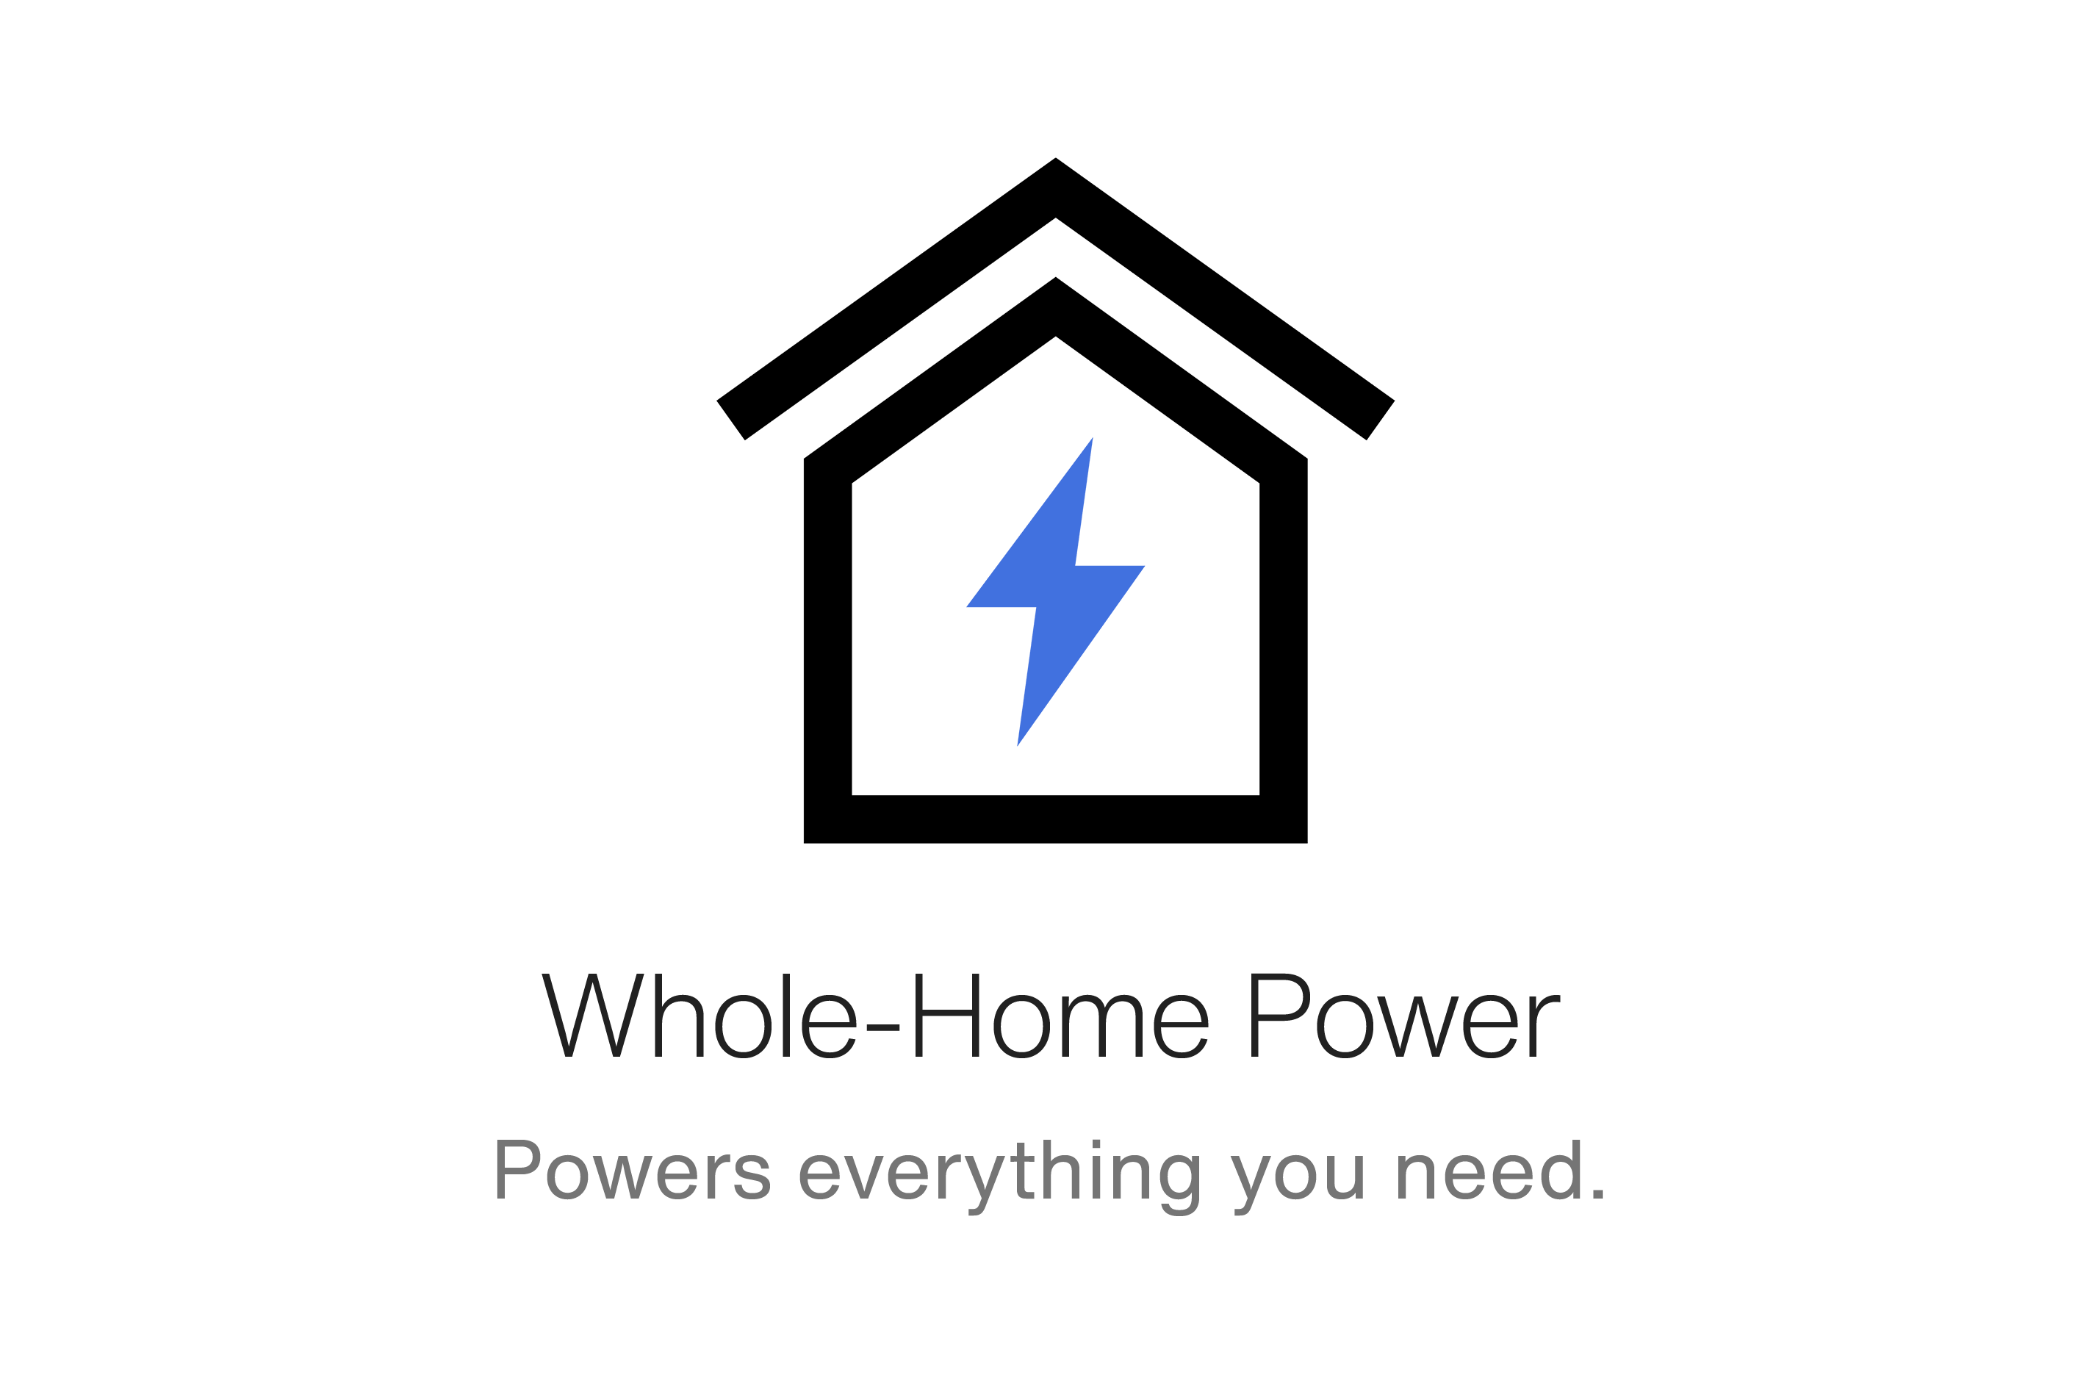 Black and blue graphic to represent a whole house power solution.
DAM # aae41039
Icon